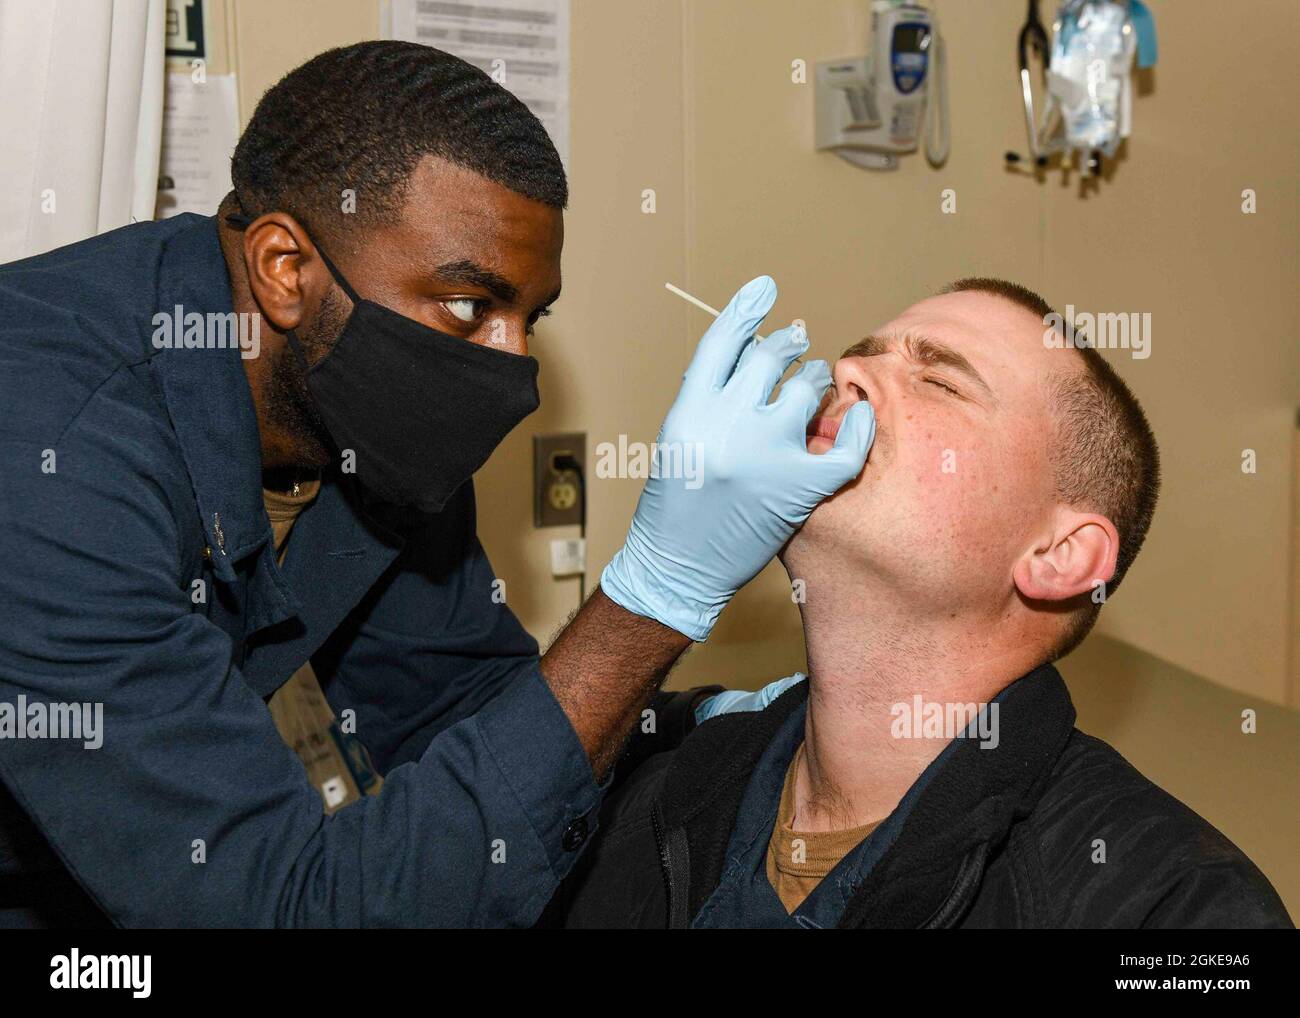 ADRIATIC SEA (Mar. 28, 2021) Hospital Corpsman 2nd Class Benjamin Richardson, left, collects a nasal swab sample from LT Jake Holland for COVID-19 testing aboard the Expeditionary Sea Base USS Hershel “Woody” Williams (ESB 4) in the Adriatic Sea, Mar. 28, 2021. Hershel “Woody” Williams is operating in U.S. Sixth Fleet to conduct interoperability training and build strategic partnerships with their African partners. Stock Photo